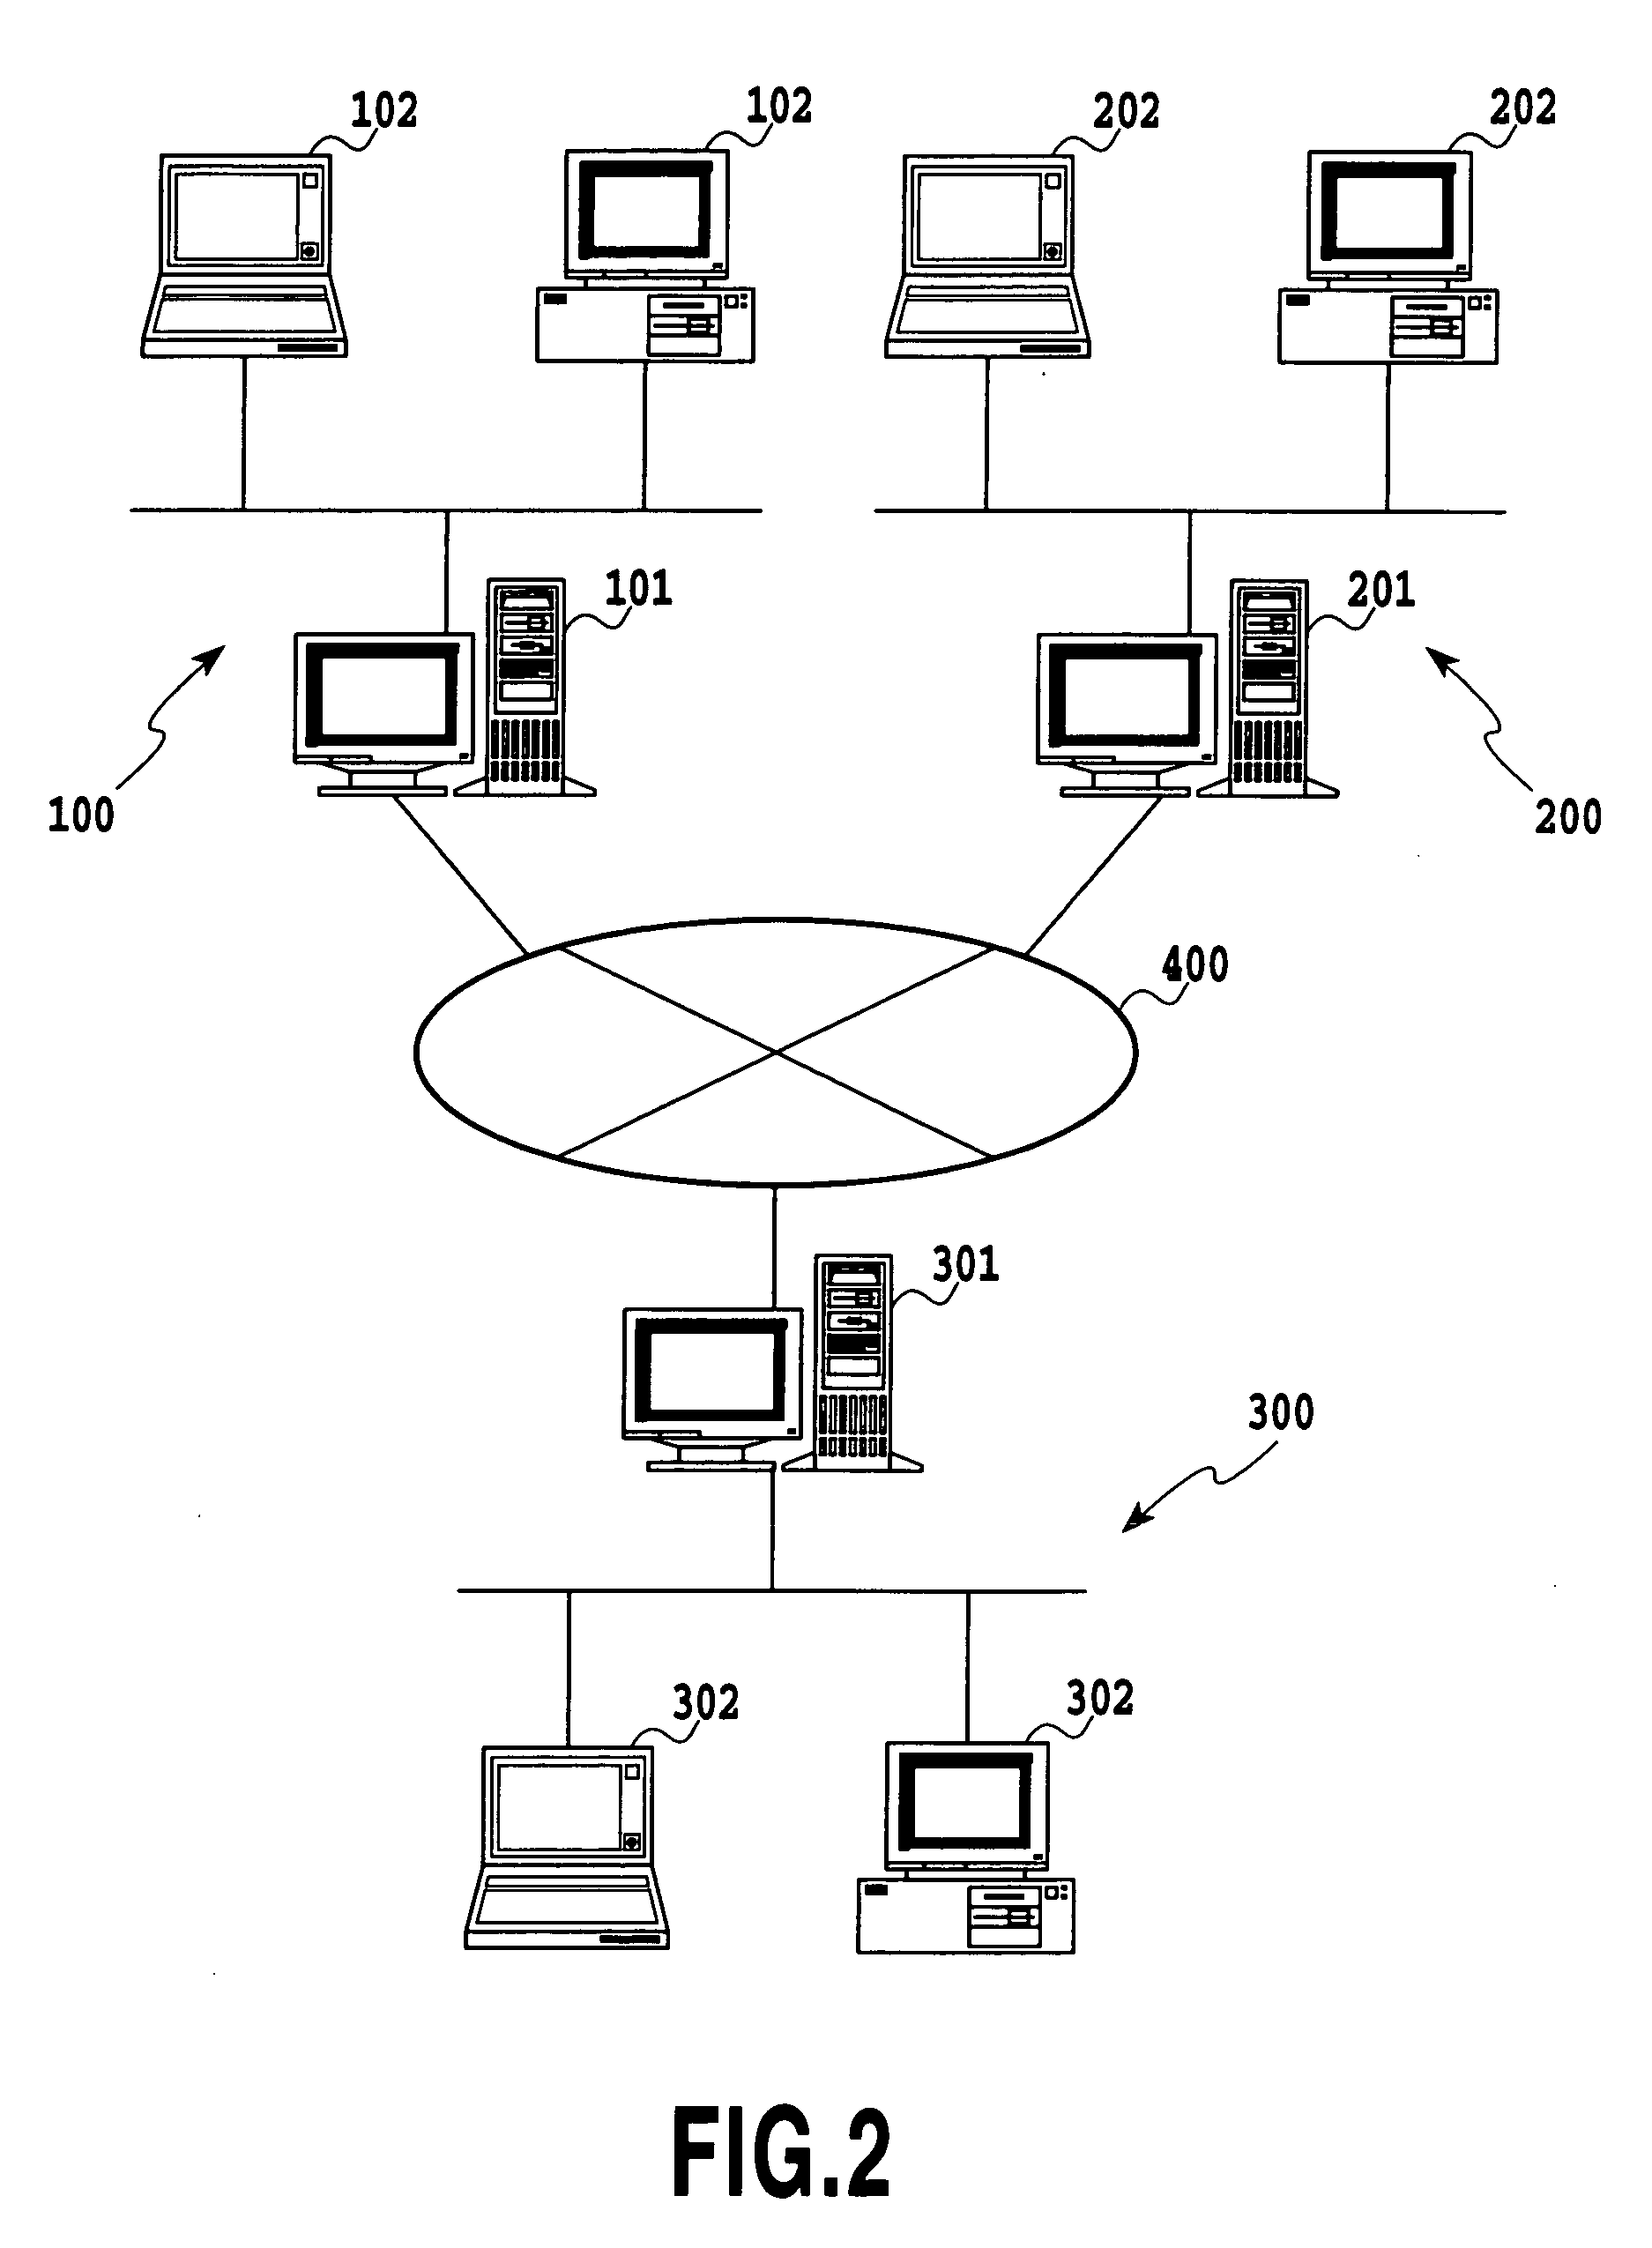 Medicine trial production supporting system